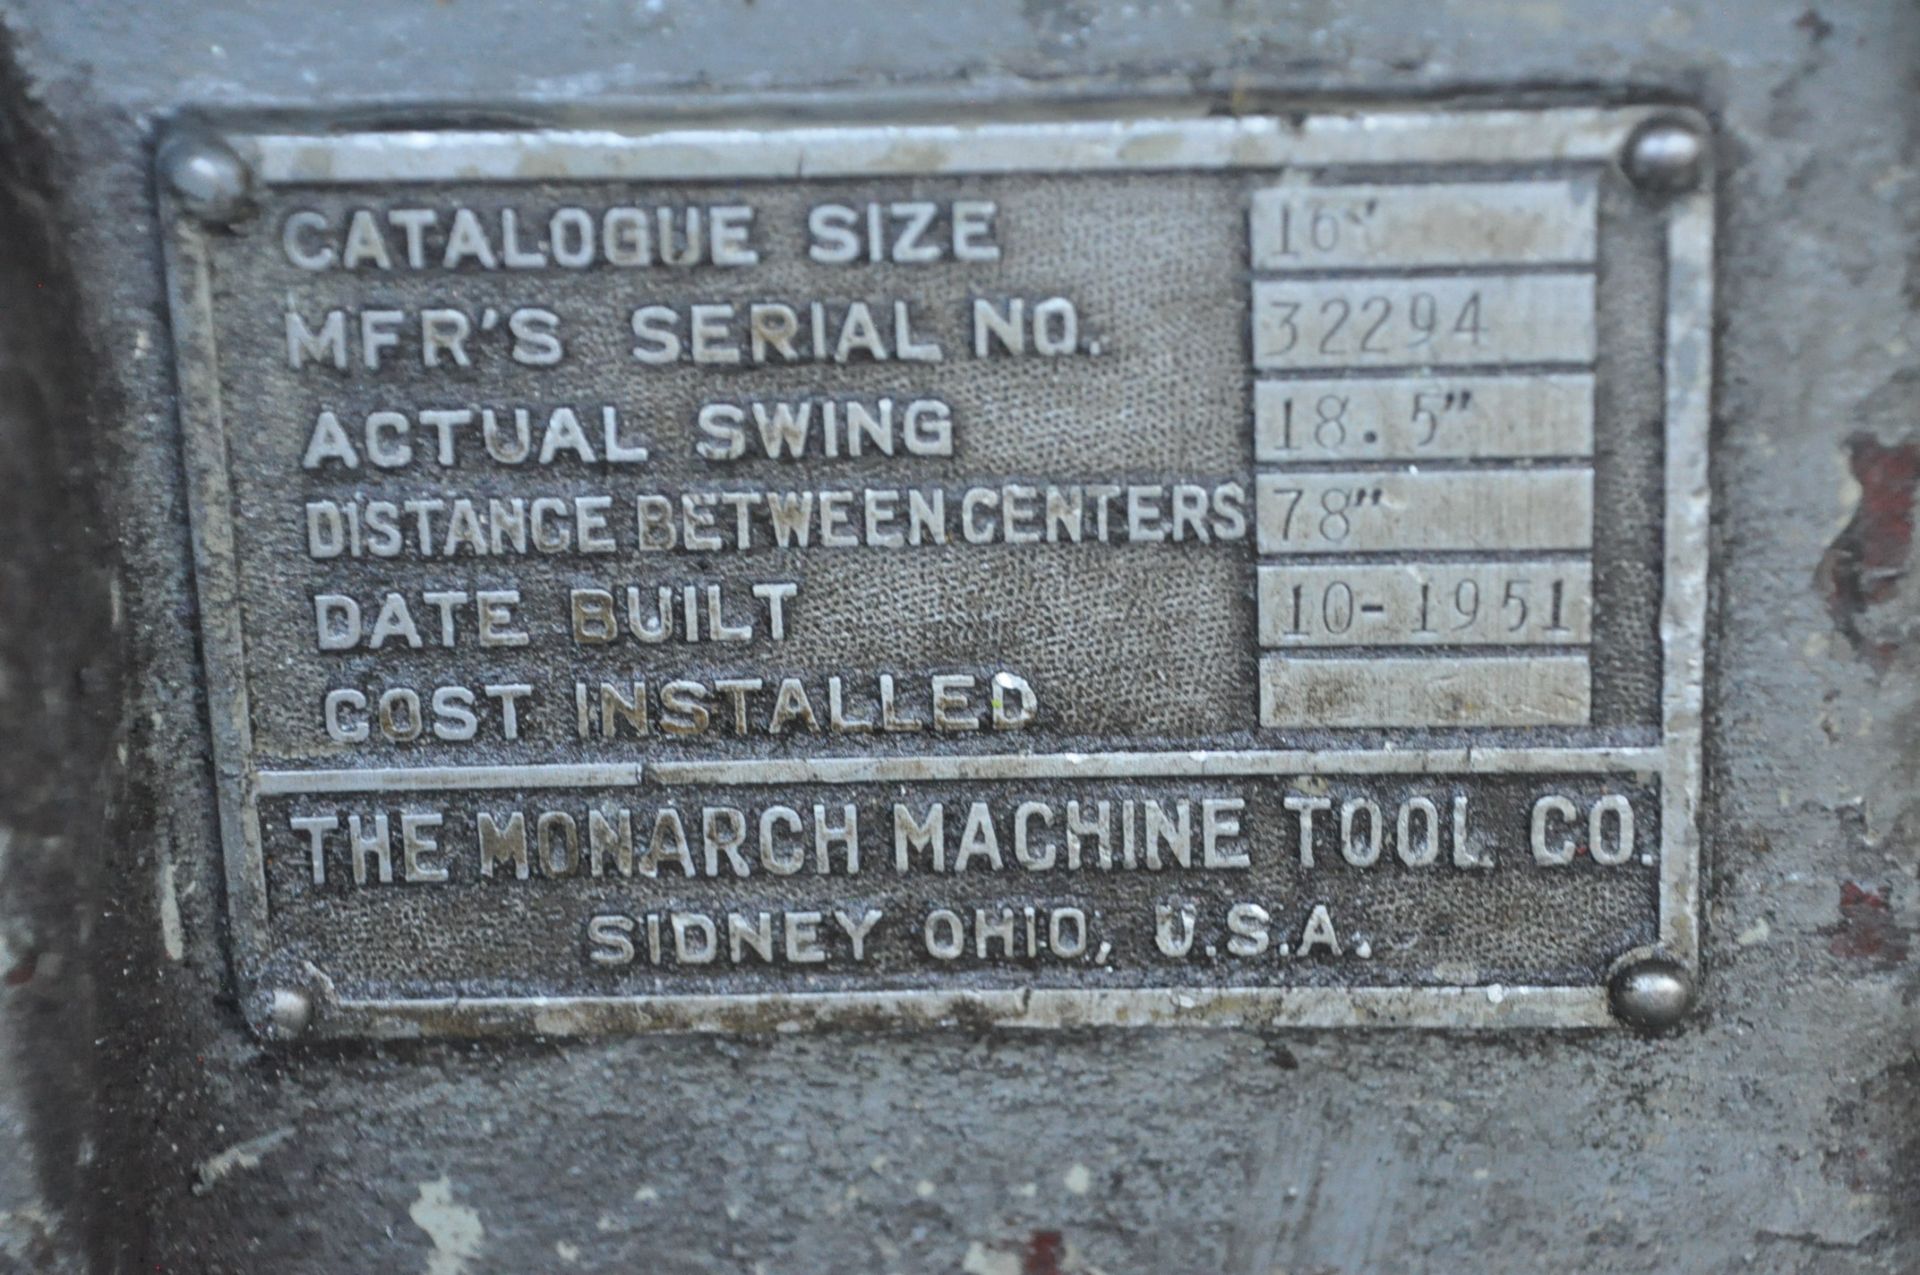 Monarch Model 16" Geared Head Engine Lathe, S/n 32294 (1951), 18.5" Actual Swing, - Image 5 of 5